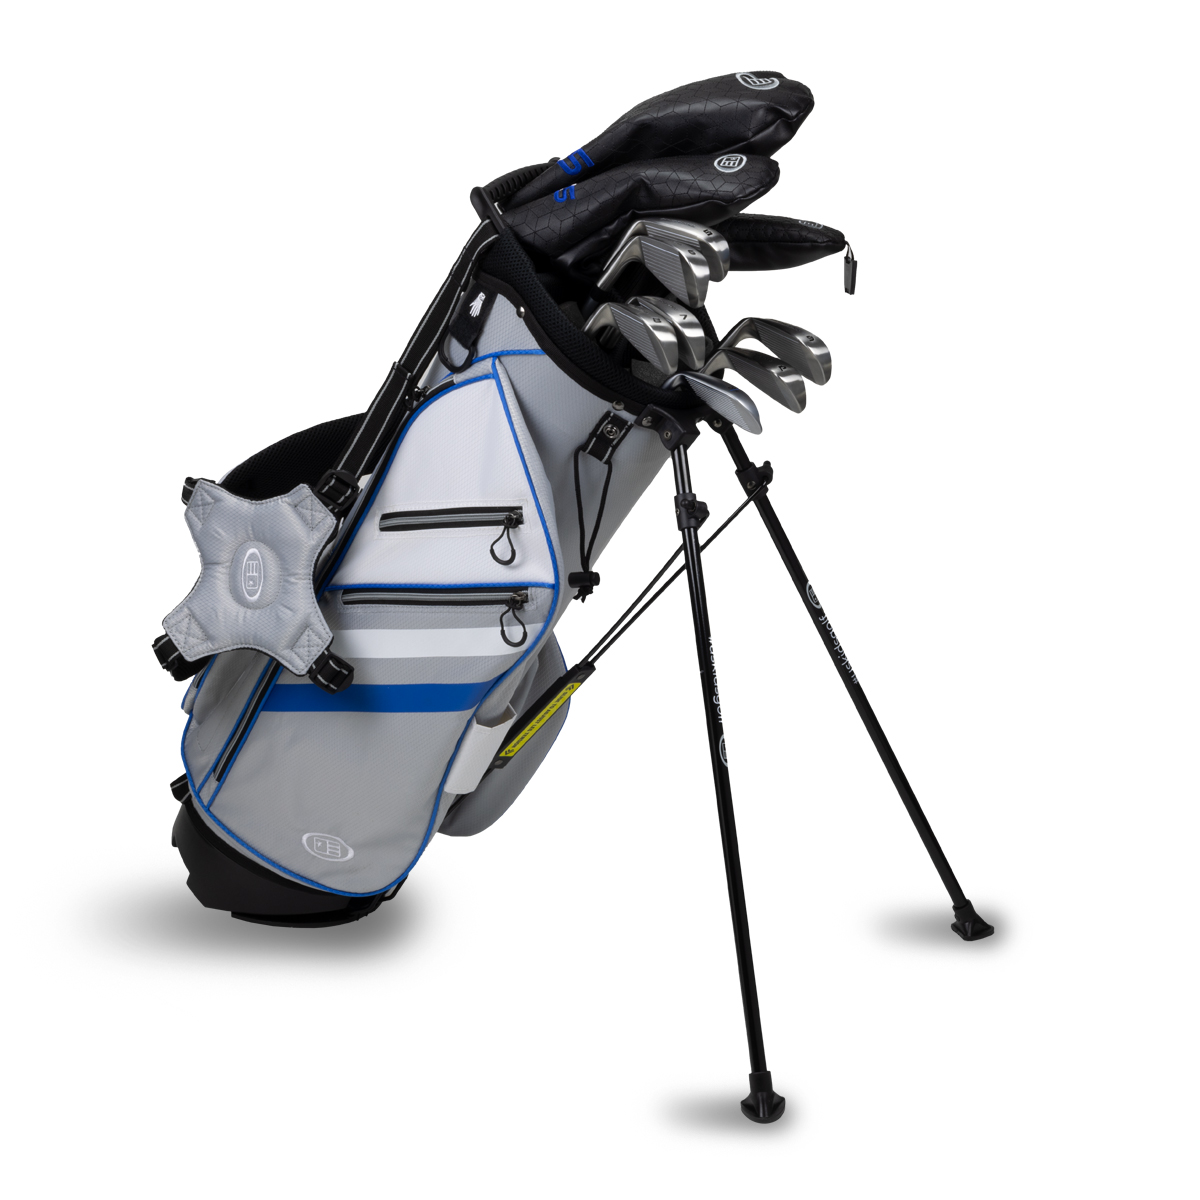 TS5-60  10 Club Stand Set Combo, Silver/White/Blue Bag